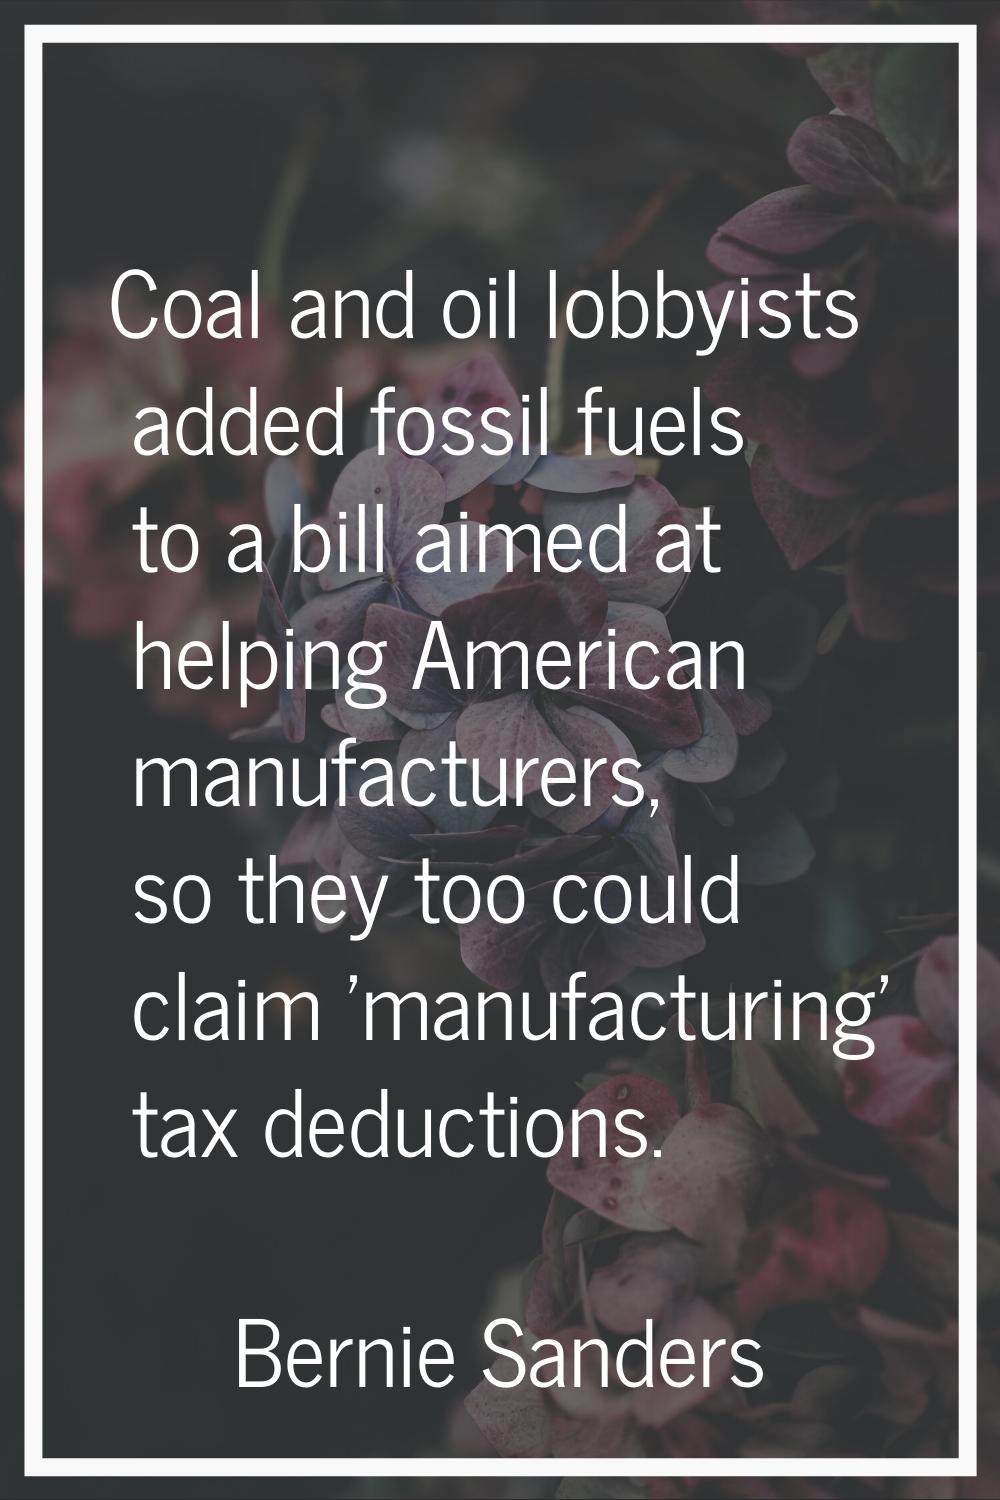 Coal and oil lobbyists added fossil fuels to a bill aimed at helping American manufacturers, so the